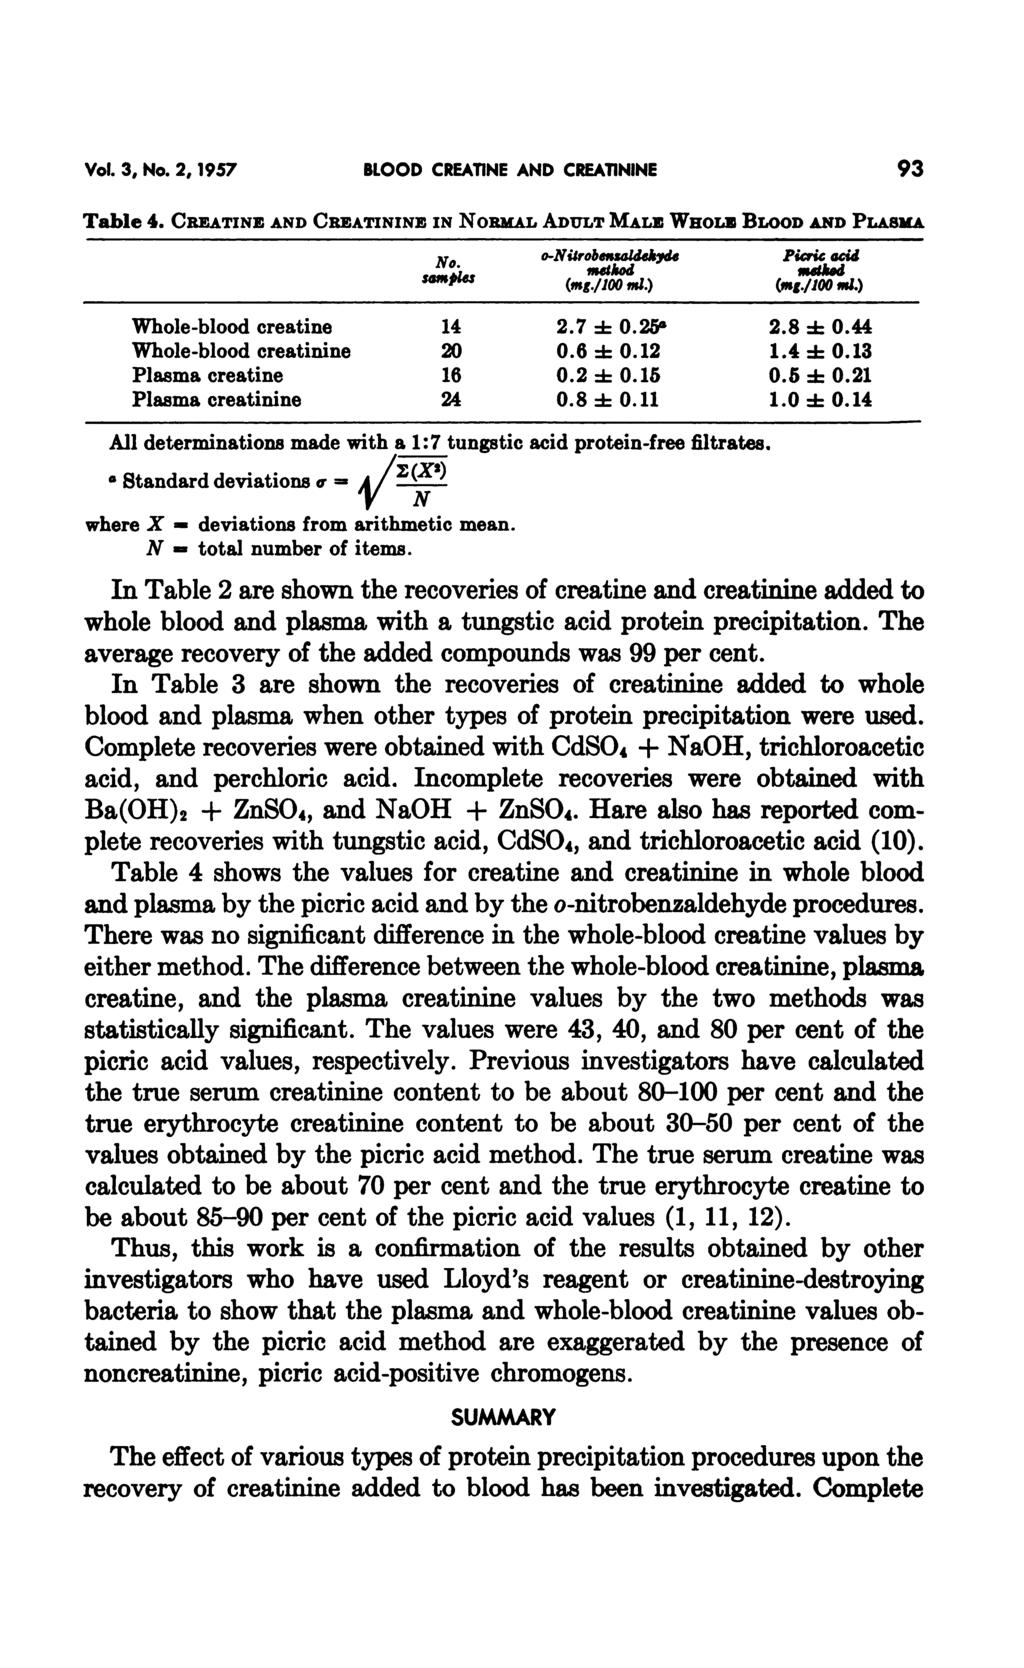 Vol. 3, No.2, 1957 BLOOD CREATINE AND CREATININE 93 Table 4. CREATINE AND CREATININE IN NORMAL ADULT MALE WHOLE BLOOD AND PLASMA No samples o-nitrobenzaldehyde method (mg./100 ml.